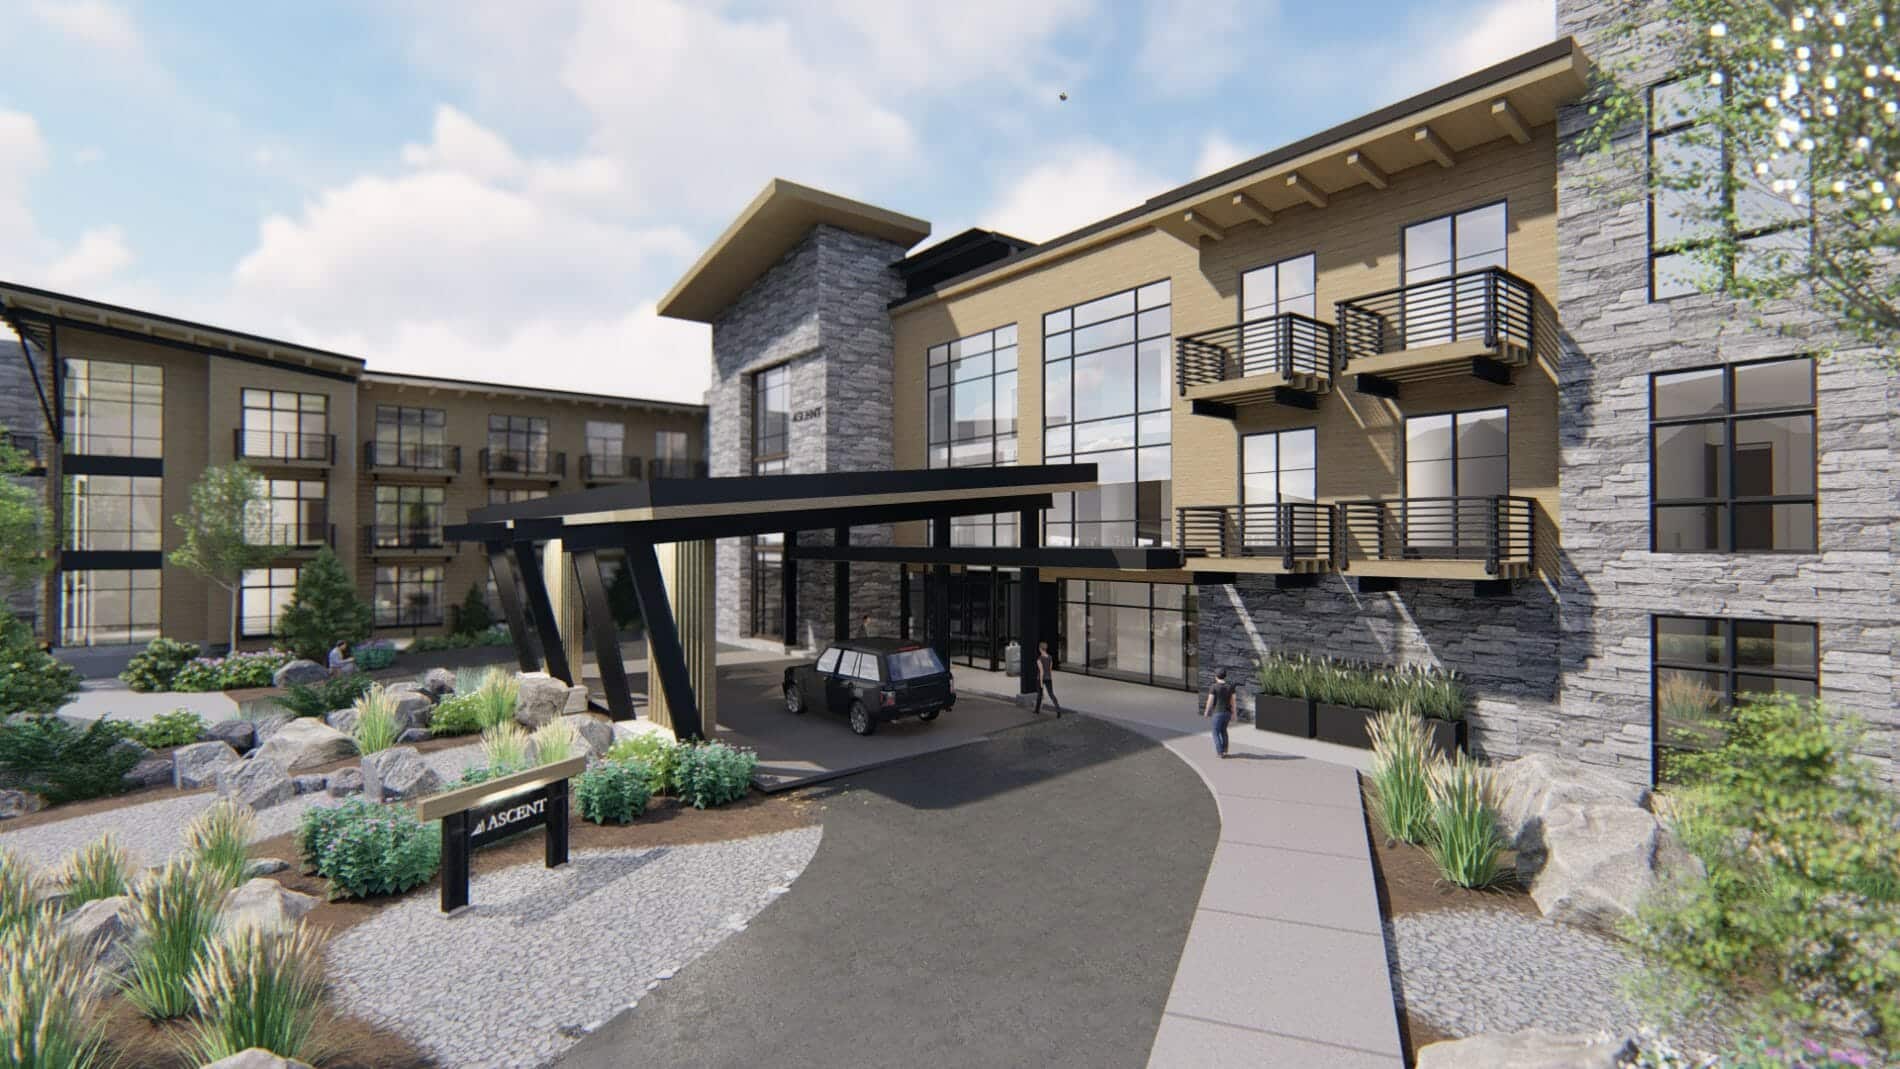 Hotel Design | Commercial Architects in Park City Utah | Think Architecture